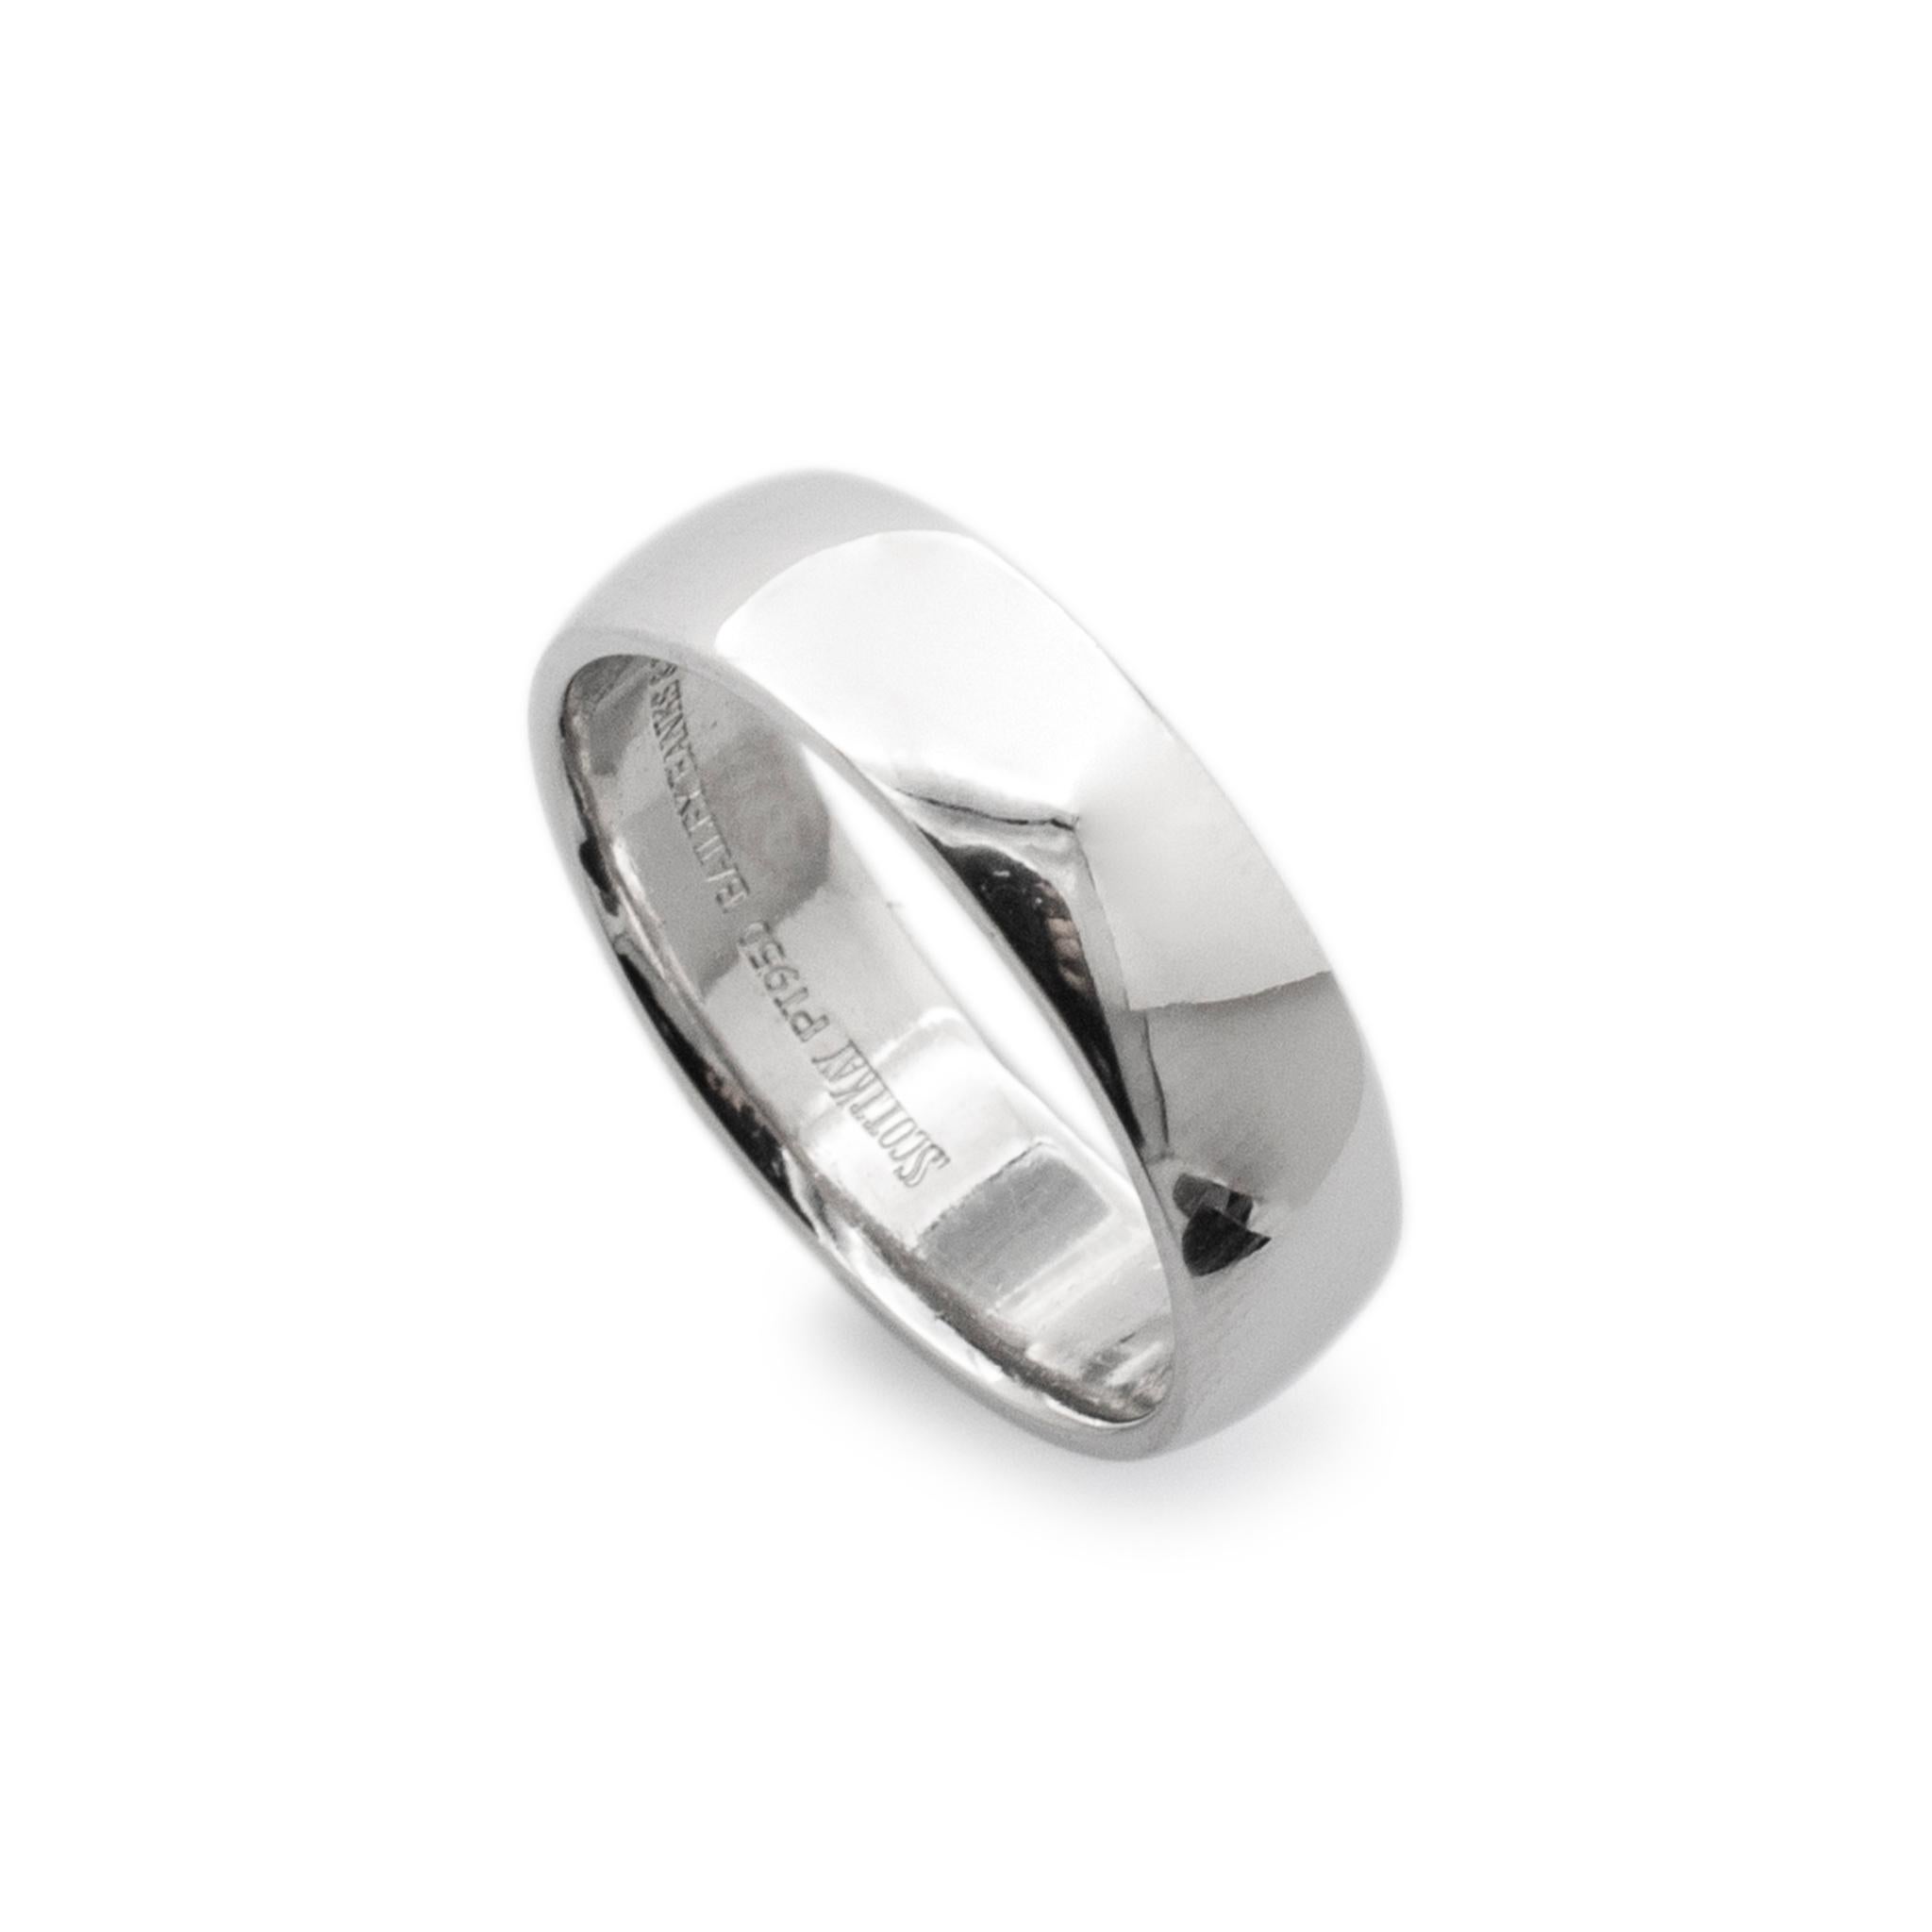 Brand: Scott Kay

Gender: Unisex

Metal Type: 950 Platinum

Size: 8

Shank Maximum Width: 5.70 mm

Weight: 9.90 Grams

Unisex 950 platinum wedding band with a comfort-fit shank. Engraved with 